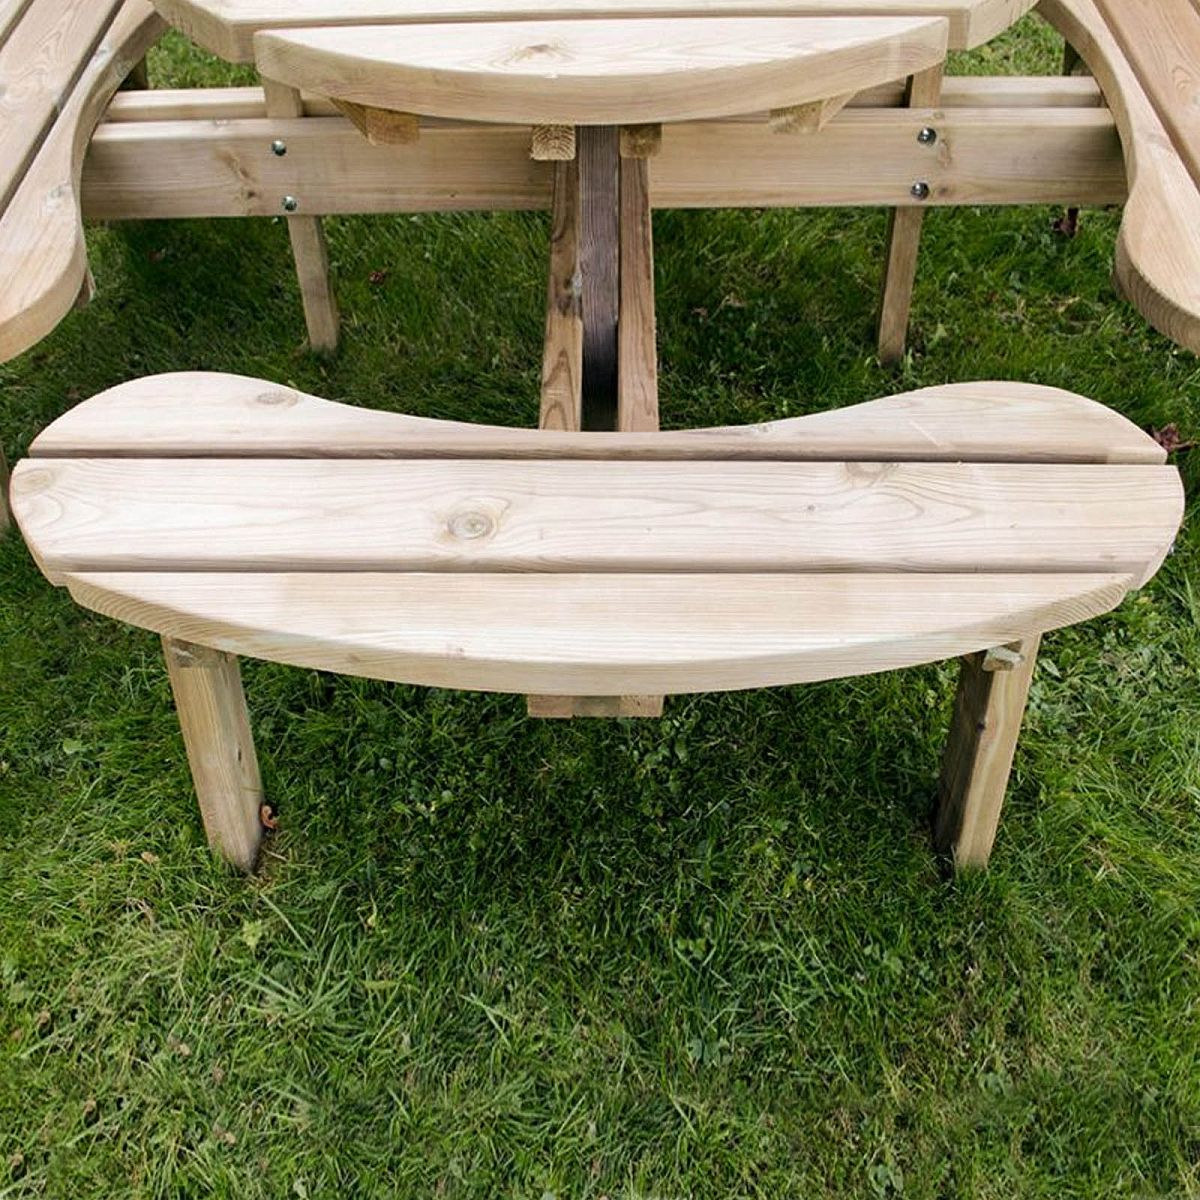 Outdoor Wooden Round Picnic Table by Forest Garden